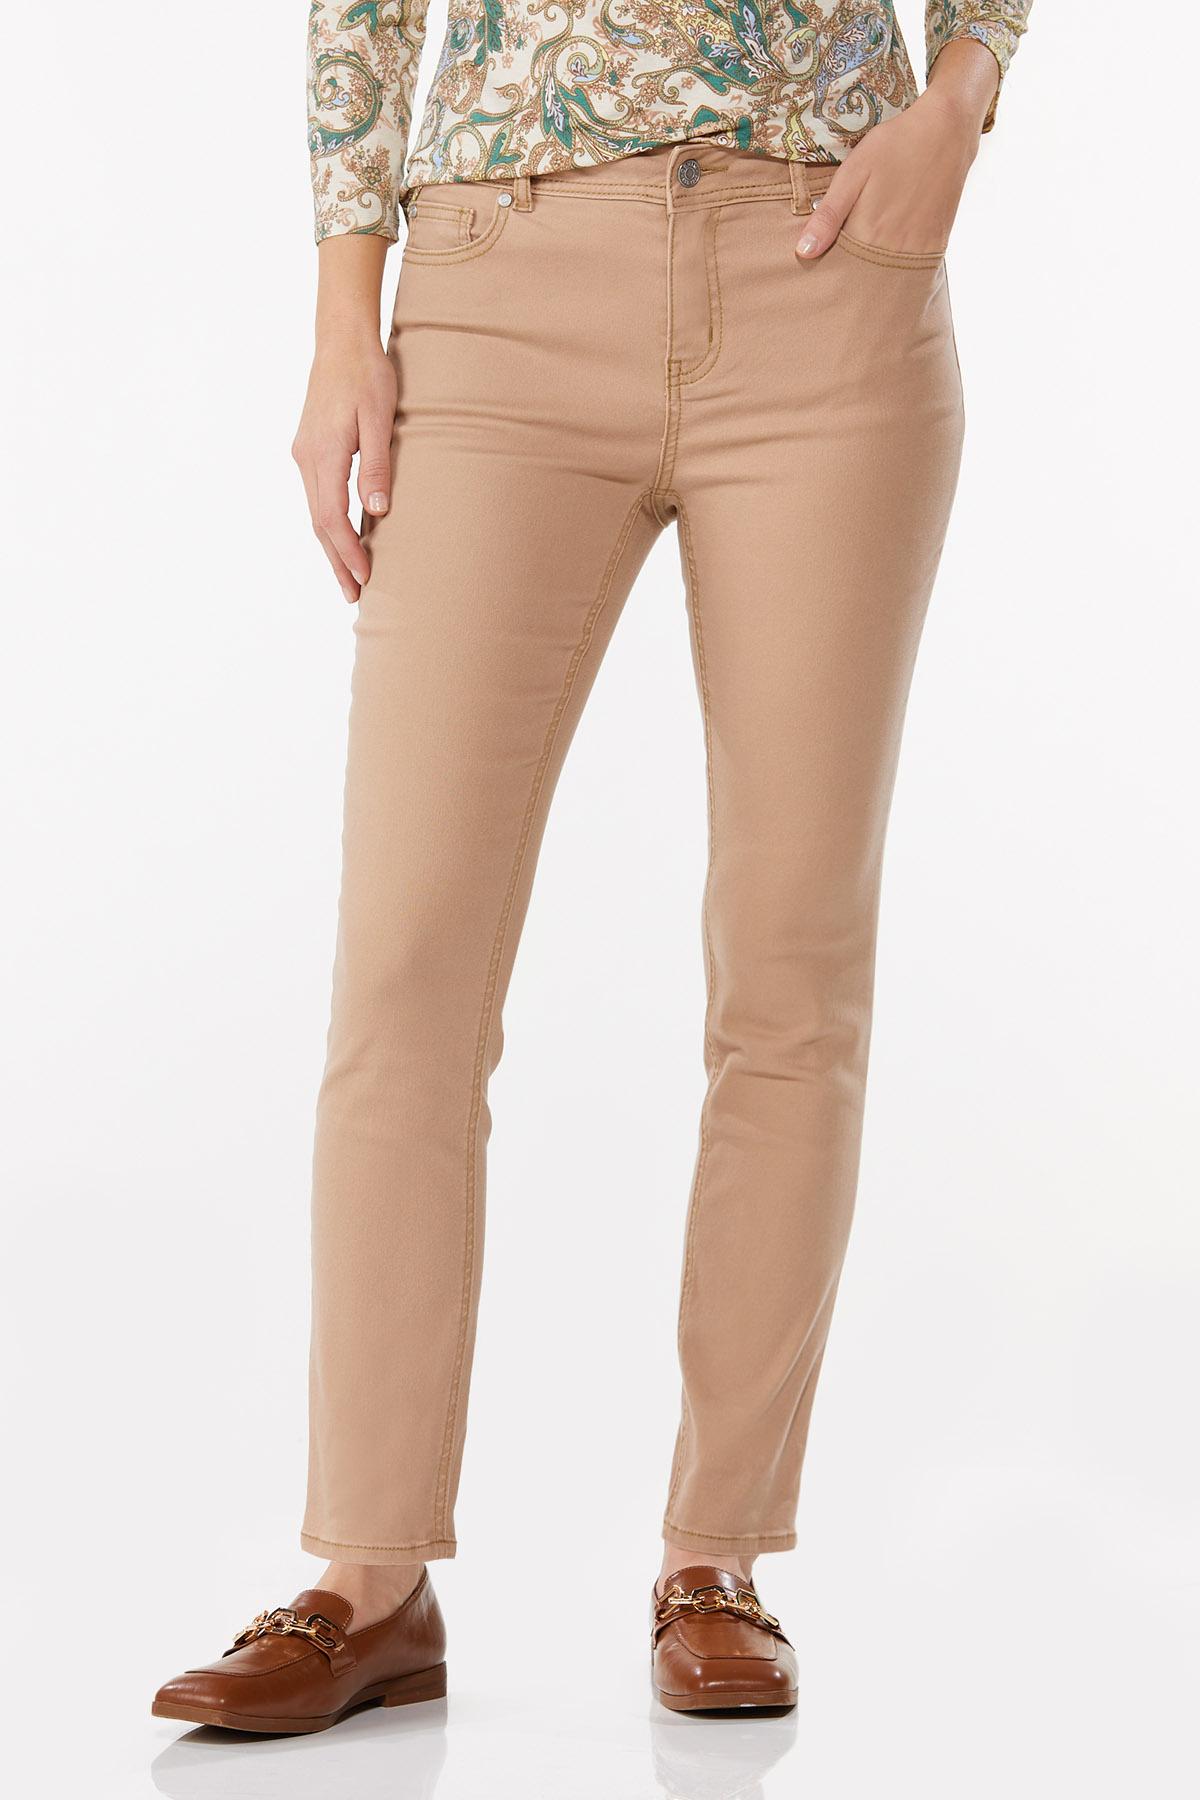 Colored Skinny Jeans Skinny Cato Fashions